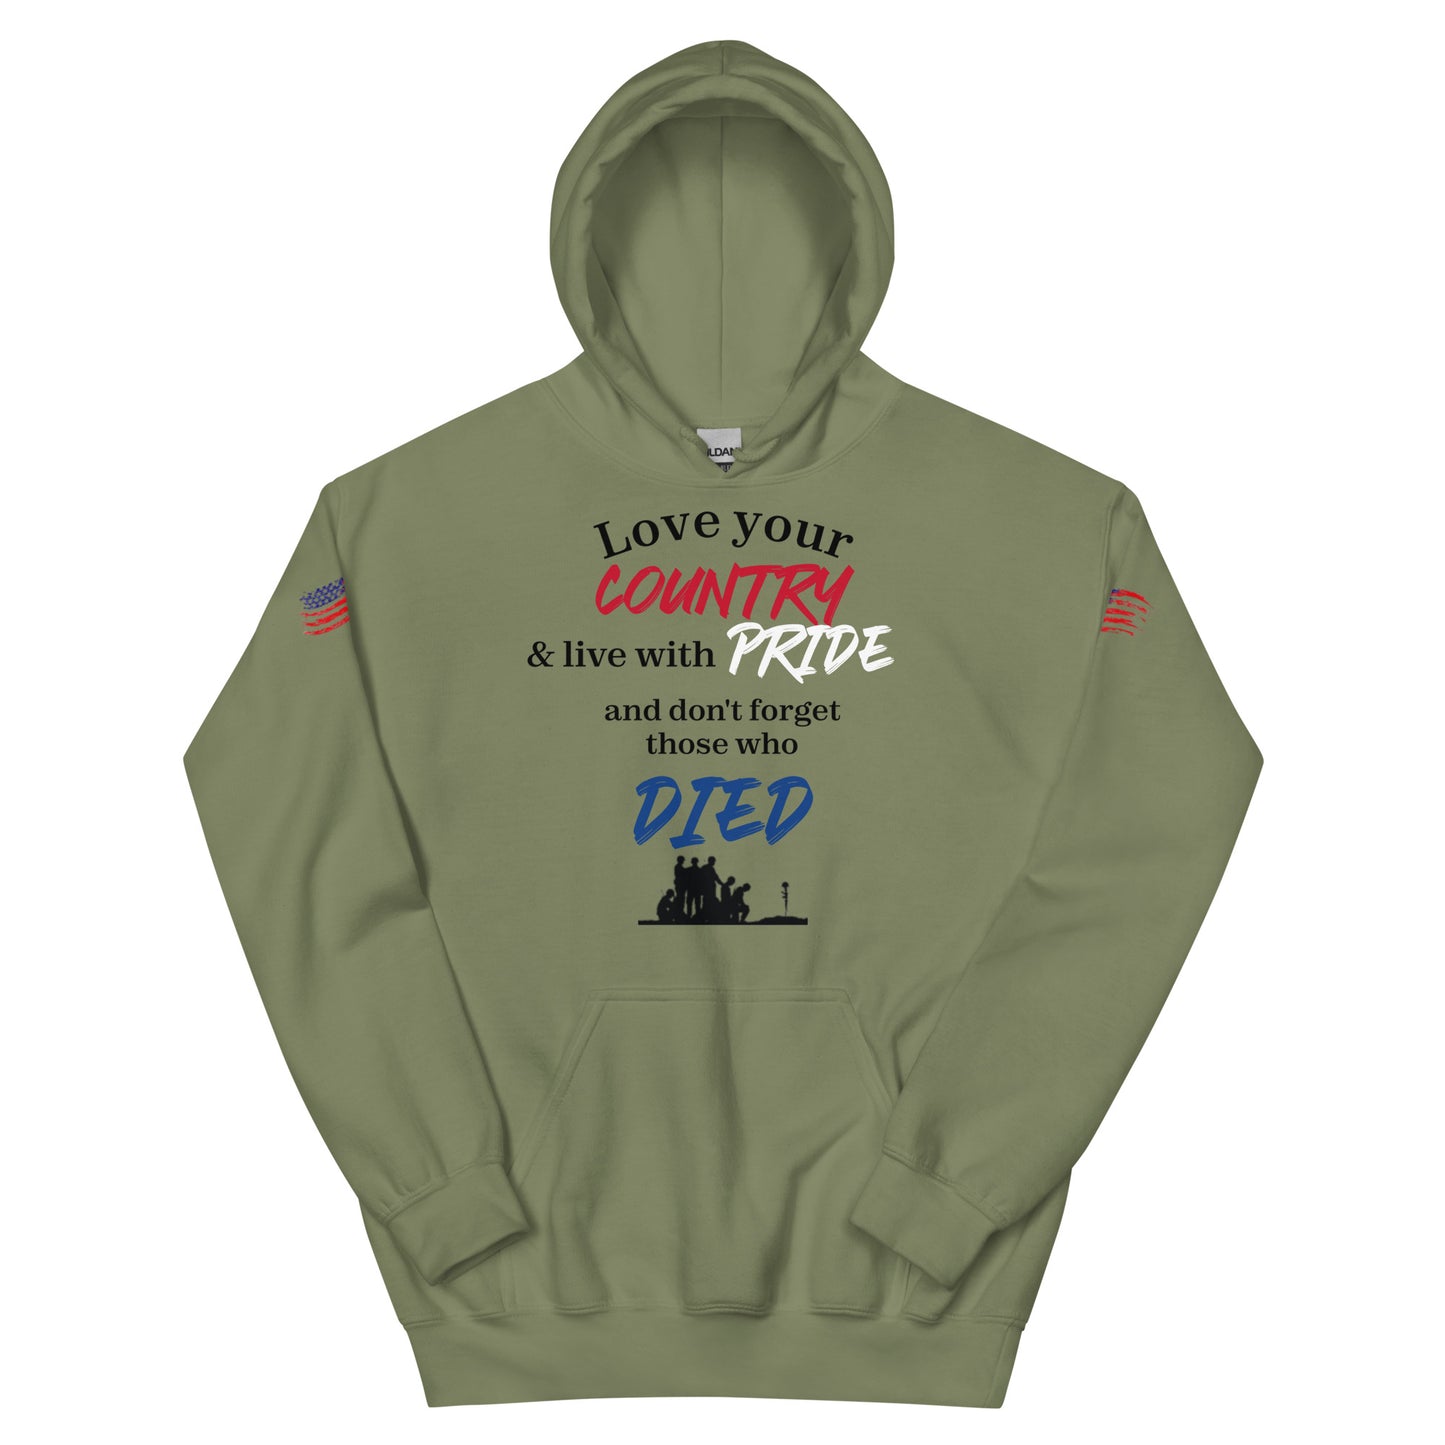 Love your country & live with pride Unisex Hoodie